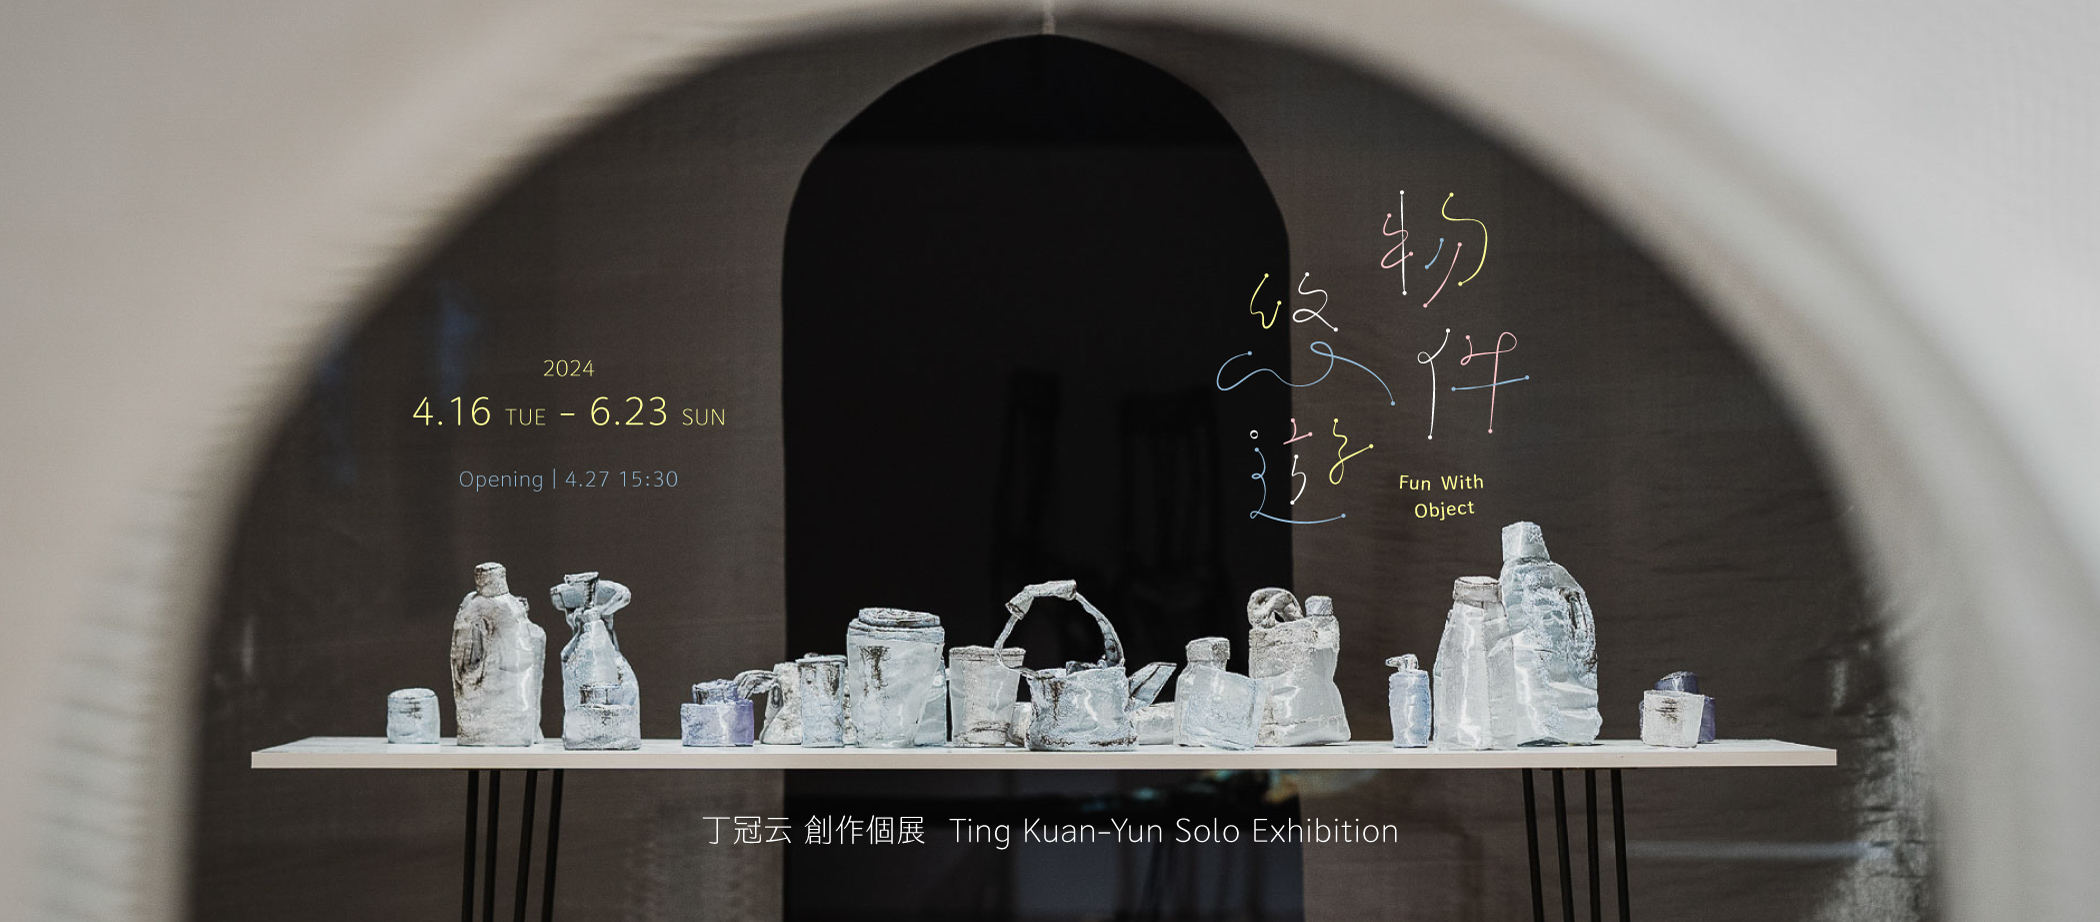 Ting Kuan-Yun Solo Exhibition: Fun With Object